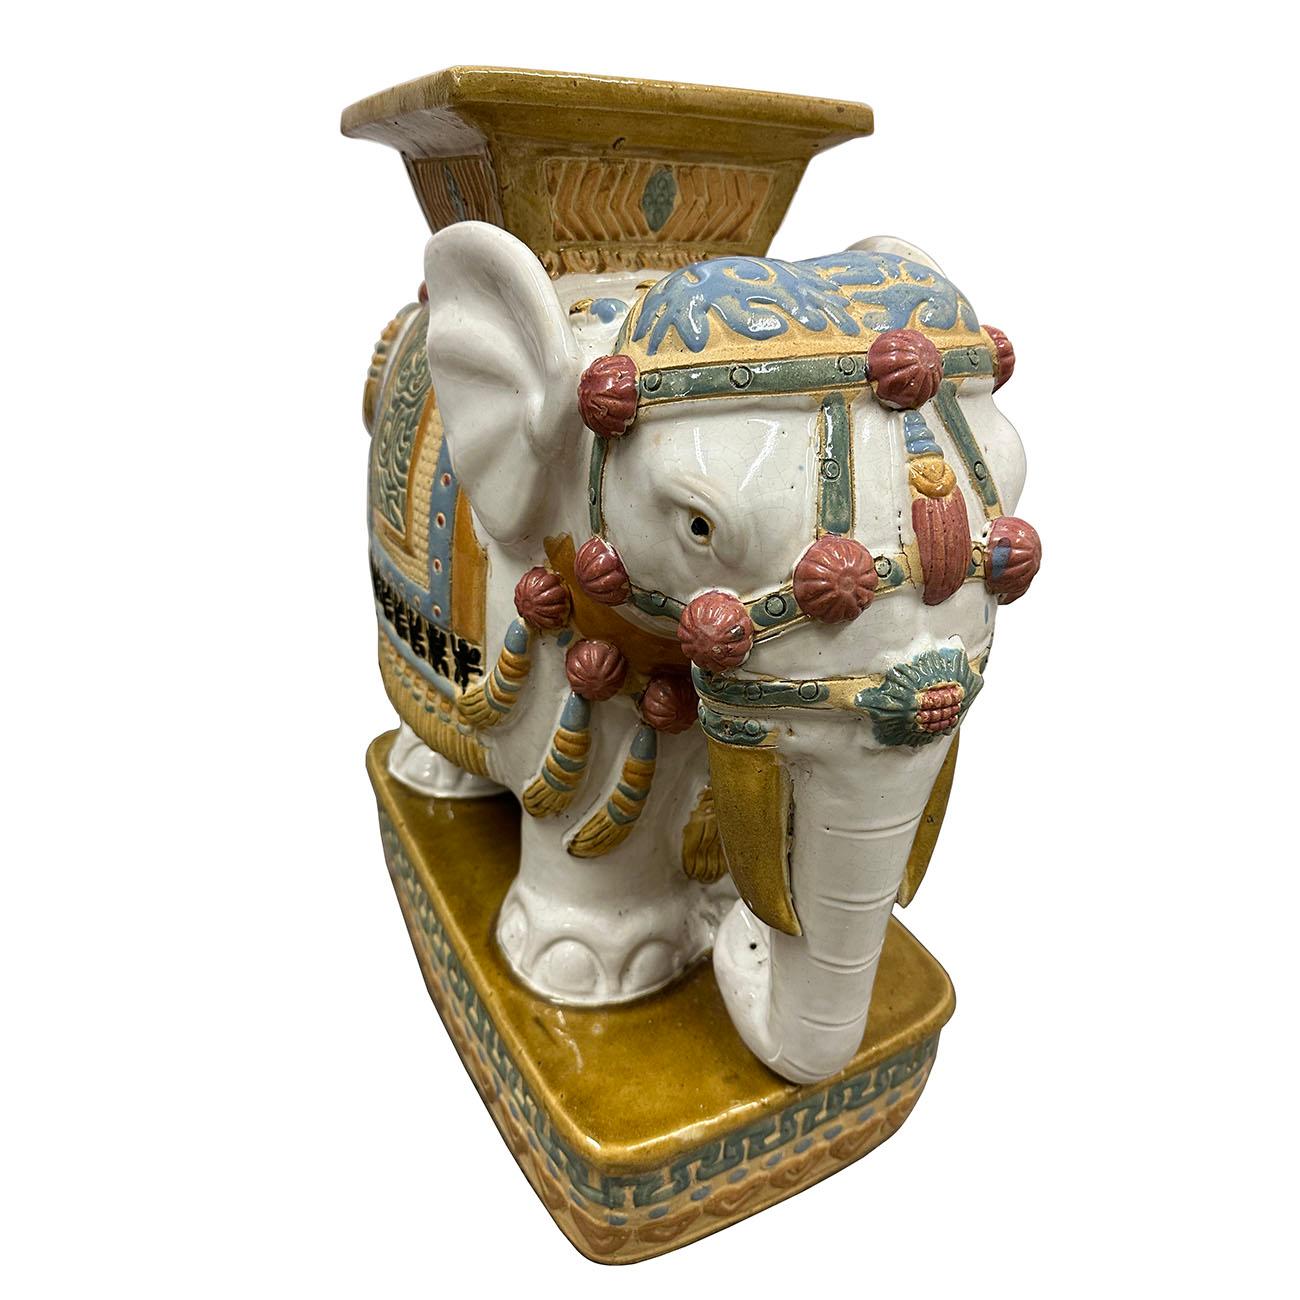 Carved Mid-20th Century Chinese Colored Glaze Ceramic Elephant Garden Seat/Plant Stand For Sale